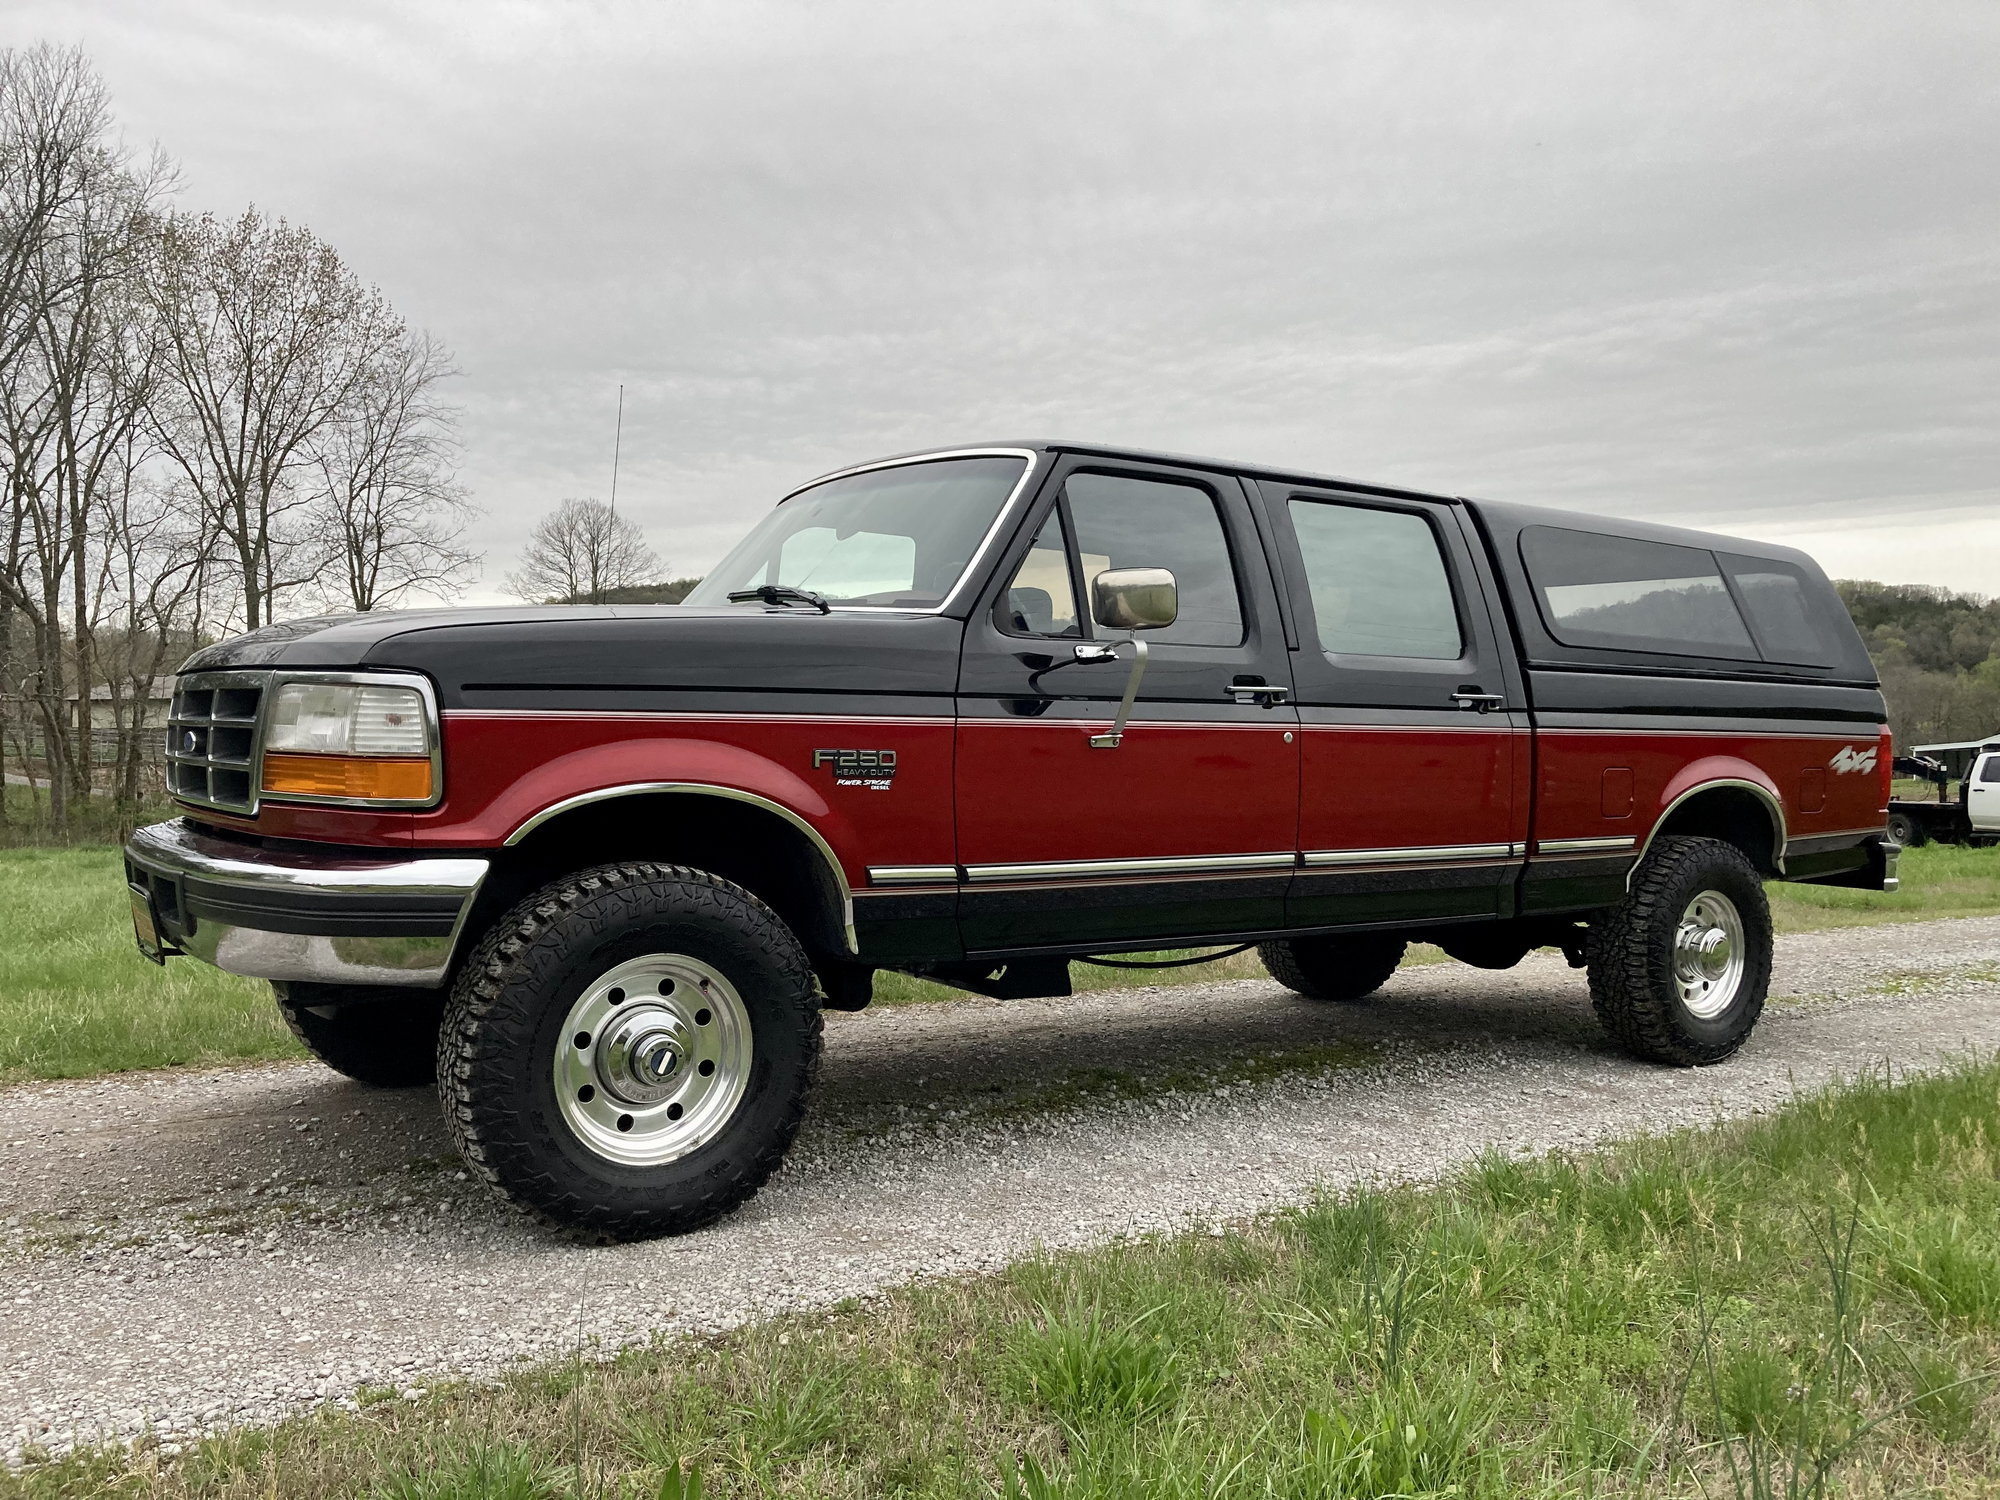 1996 Ford F-250 - Mint Crew-cab short-bed - Used - VIN 1fthw26f1vec62788 - 158,000 Miles - 8 cyl - 4WD - Automatic - Truck - Black - Gordonsville, TN 38563, United States